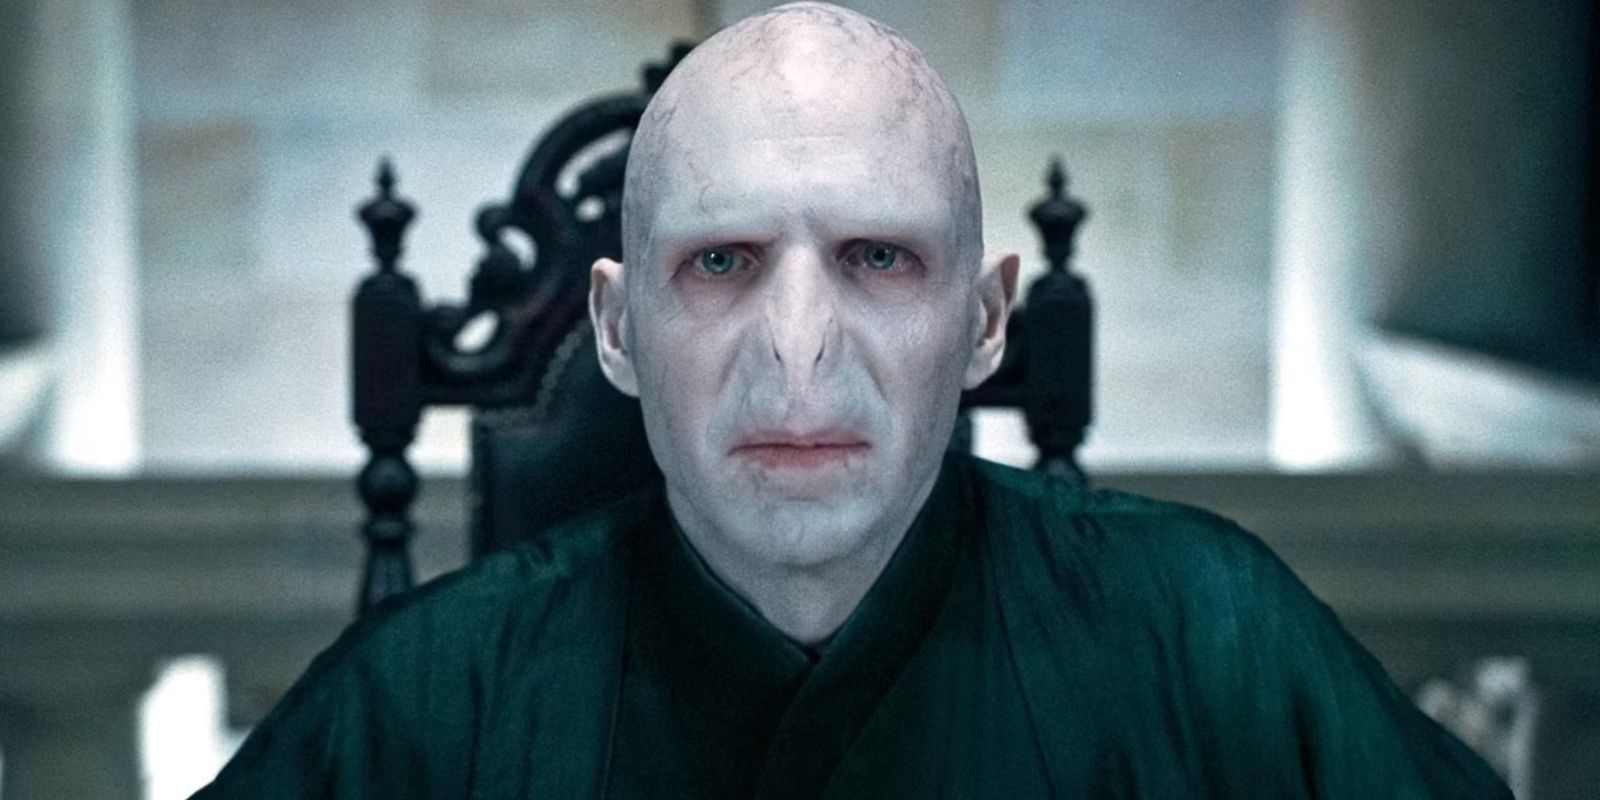 Ralph Fiennes as Voldemort in Harry Potter and the Deathly Hallows Part 1